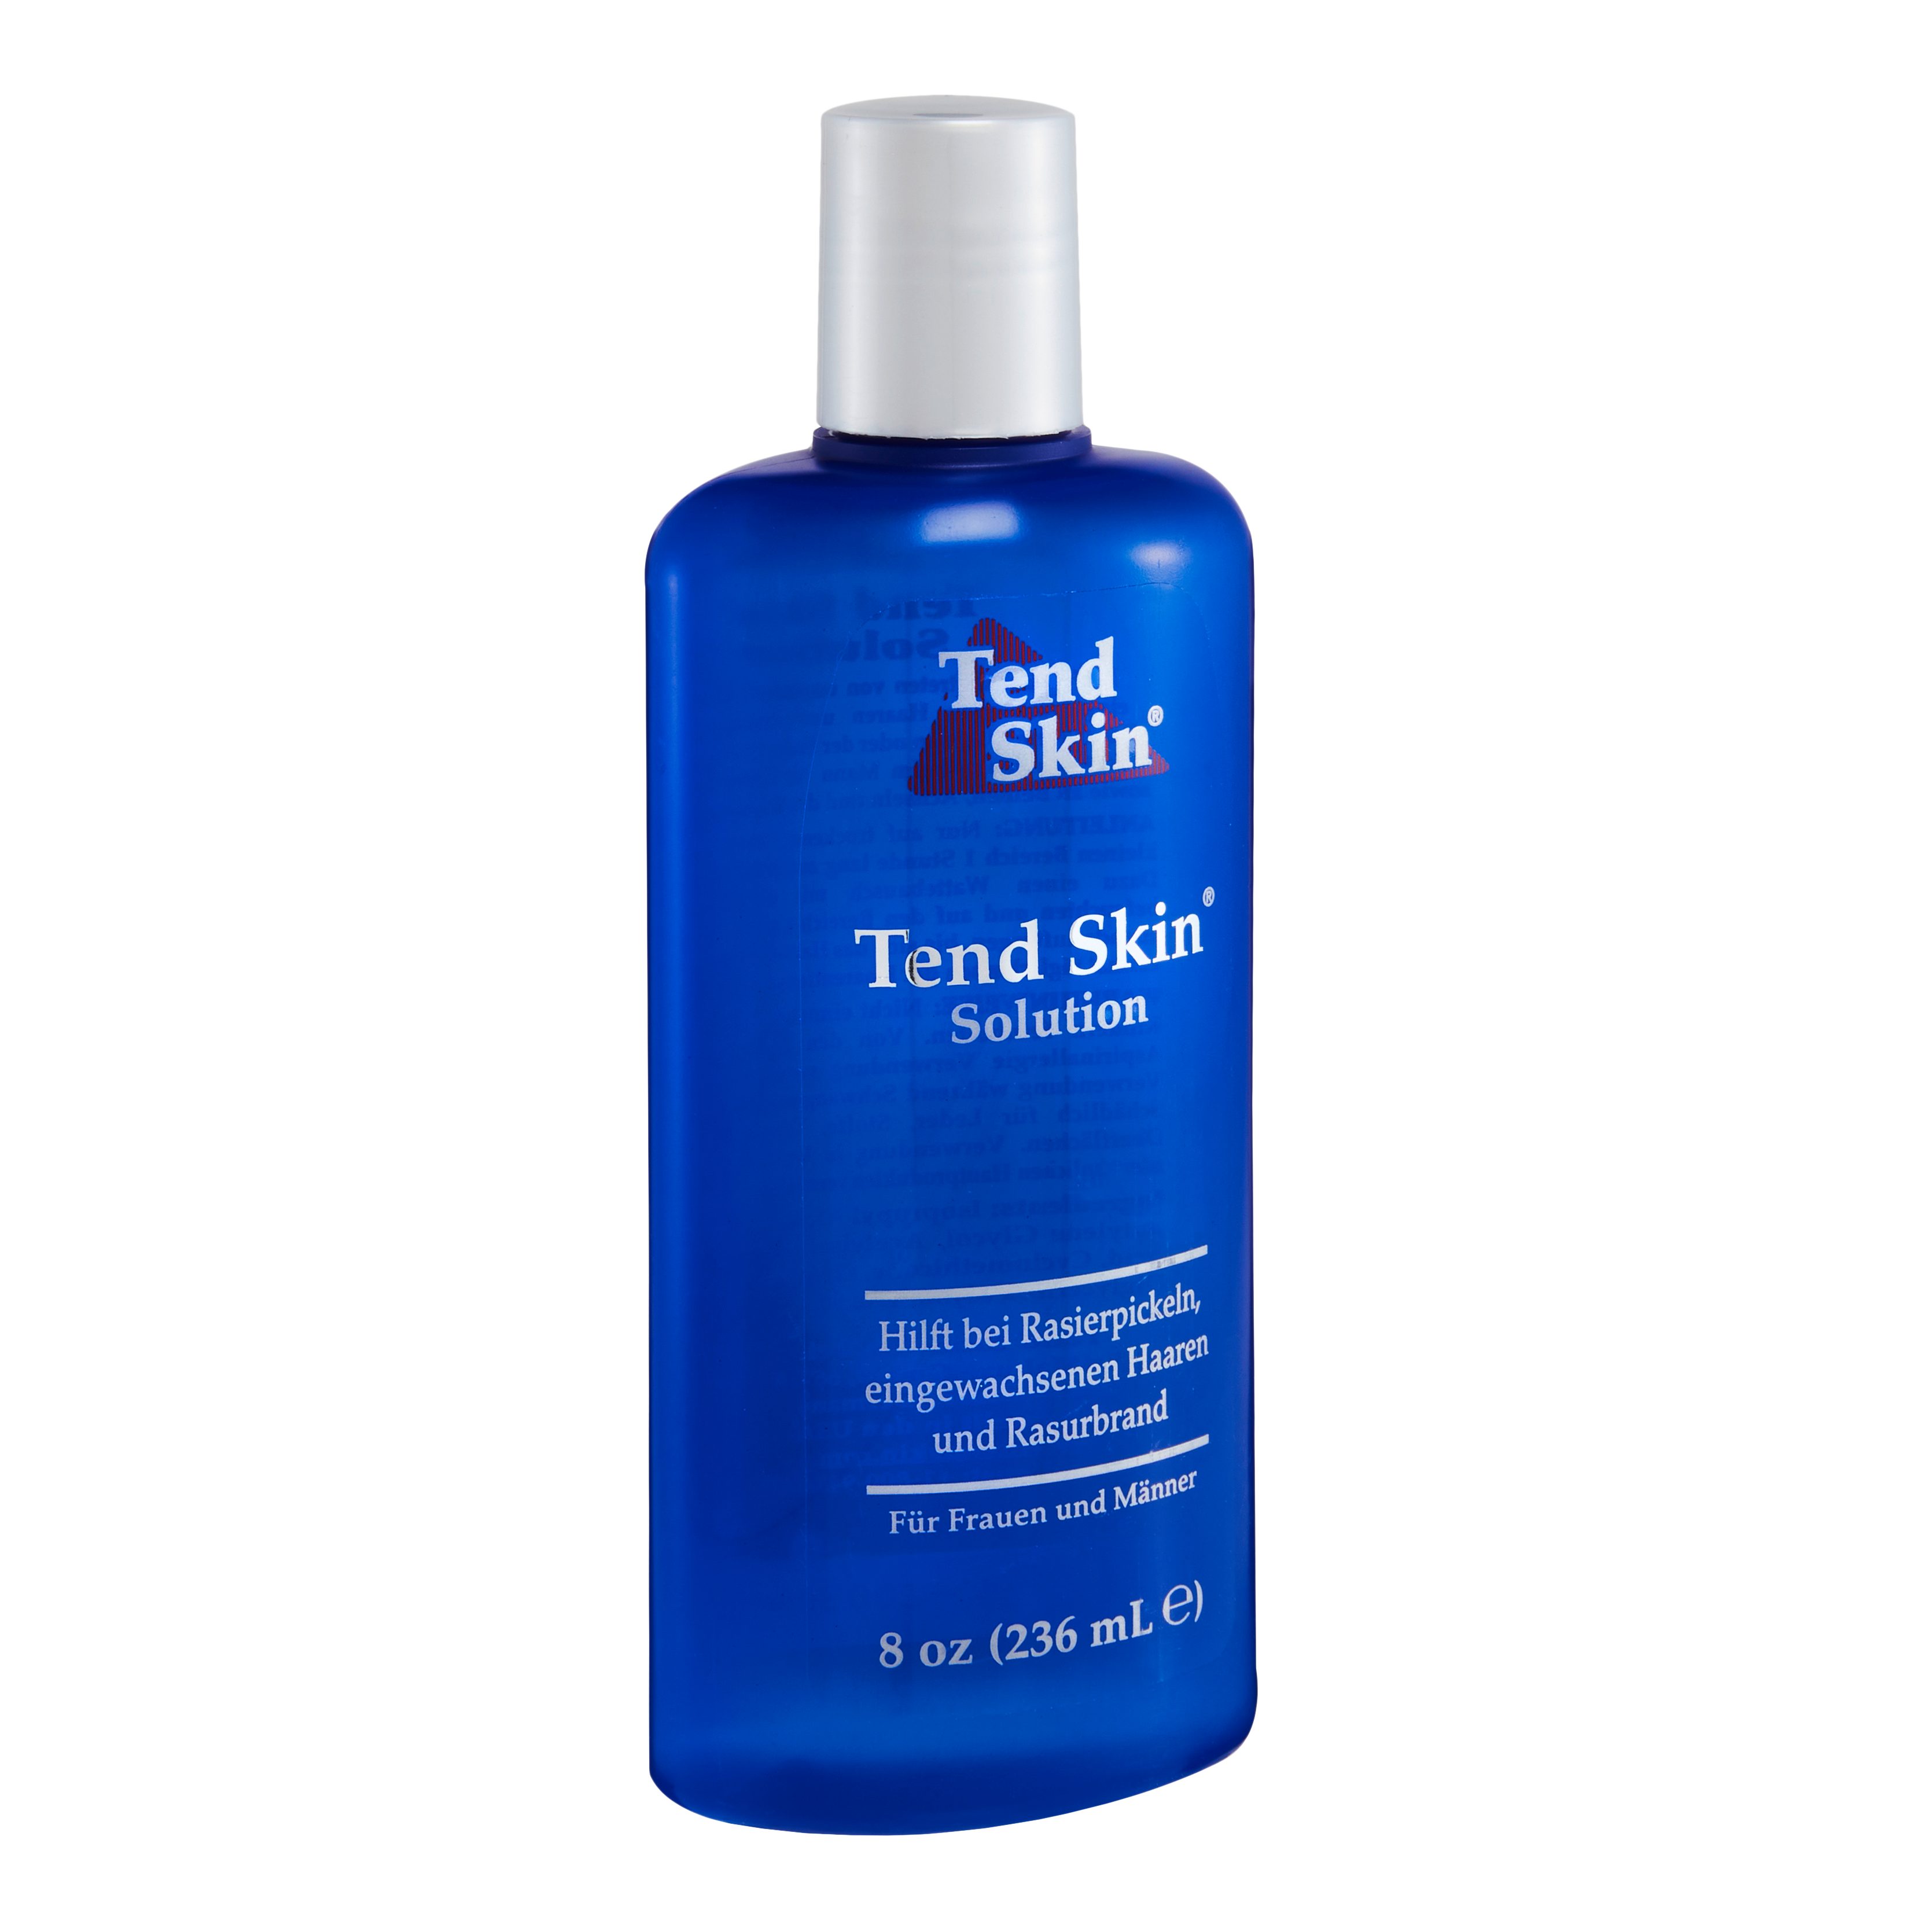 Tend Skin After-Shave Solution 236ml